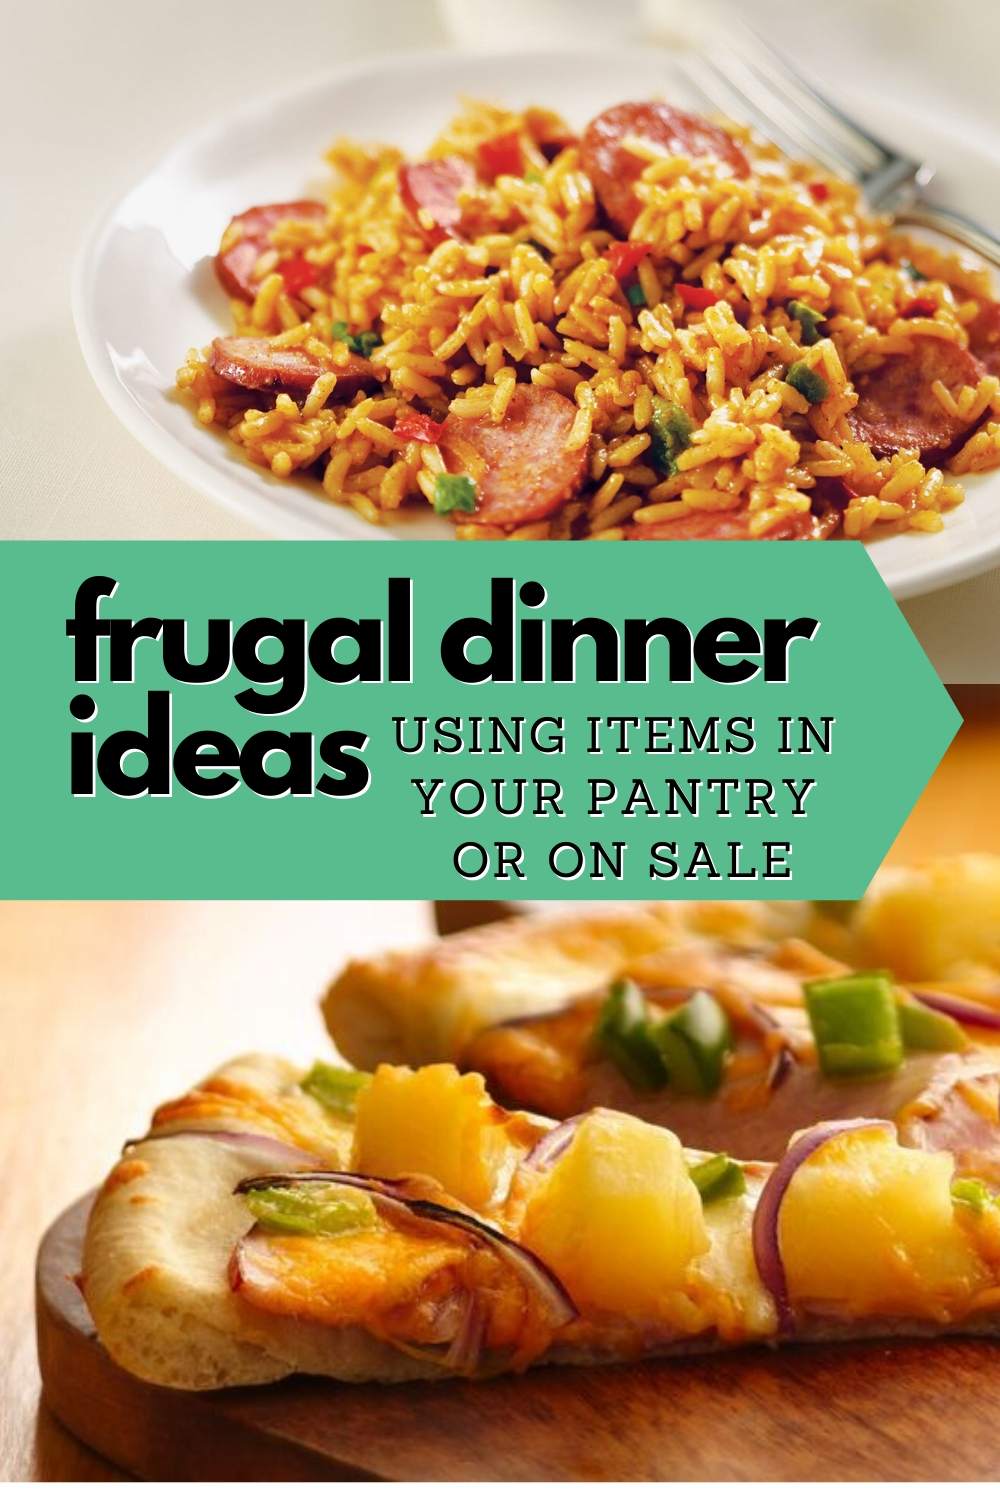 Pineapple Pizza and More Frugal Dinner Ideas